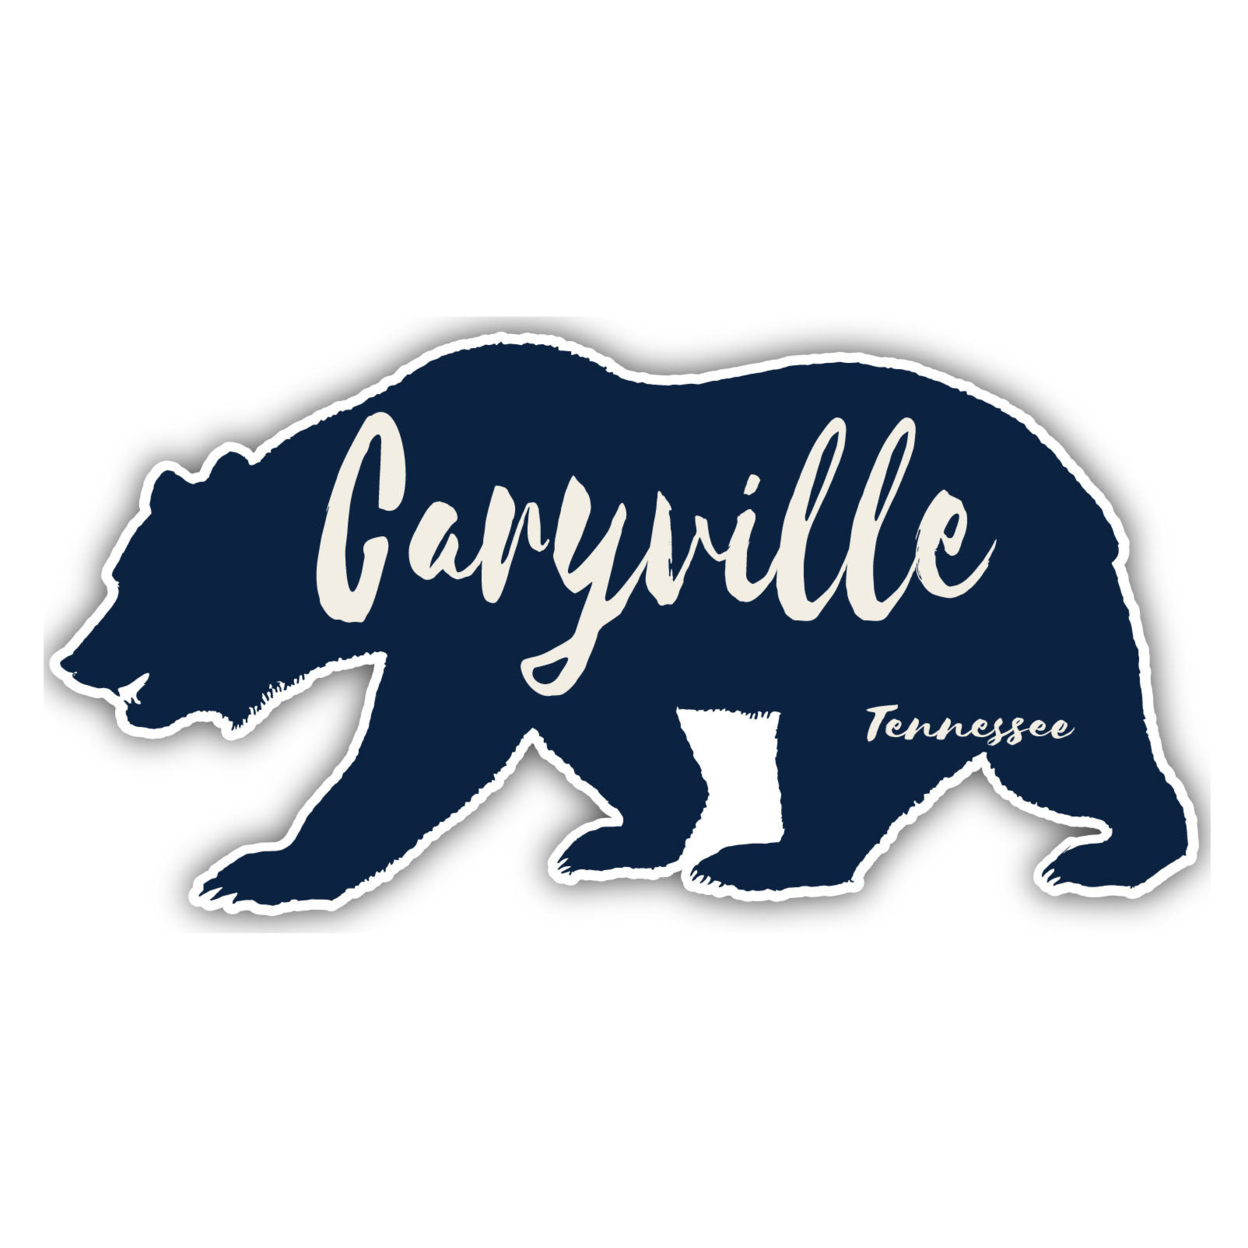 Caryville Tennessee Souvenir Decorative Stickers (Choose Theme And Size) - Single Unit, 2-Inch, Camp Life